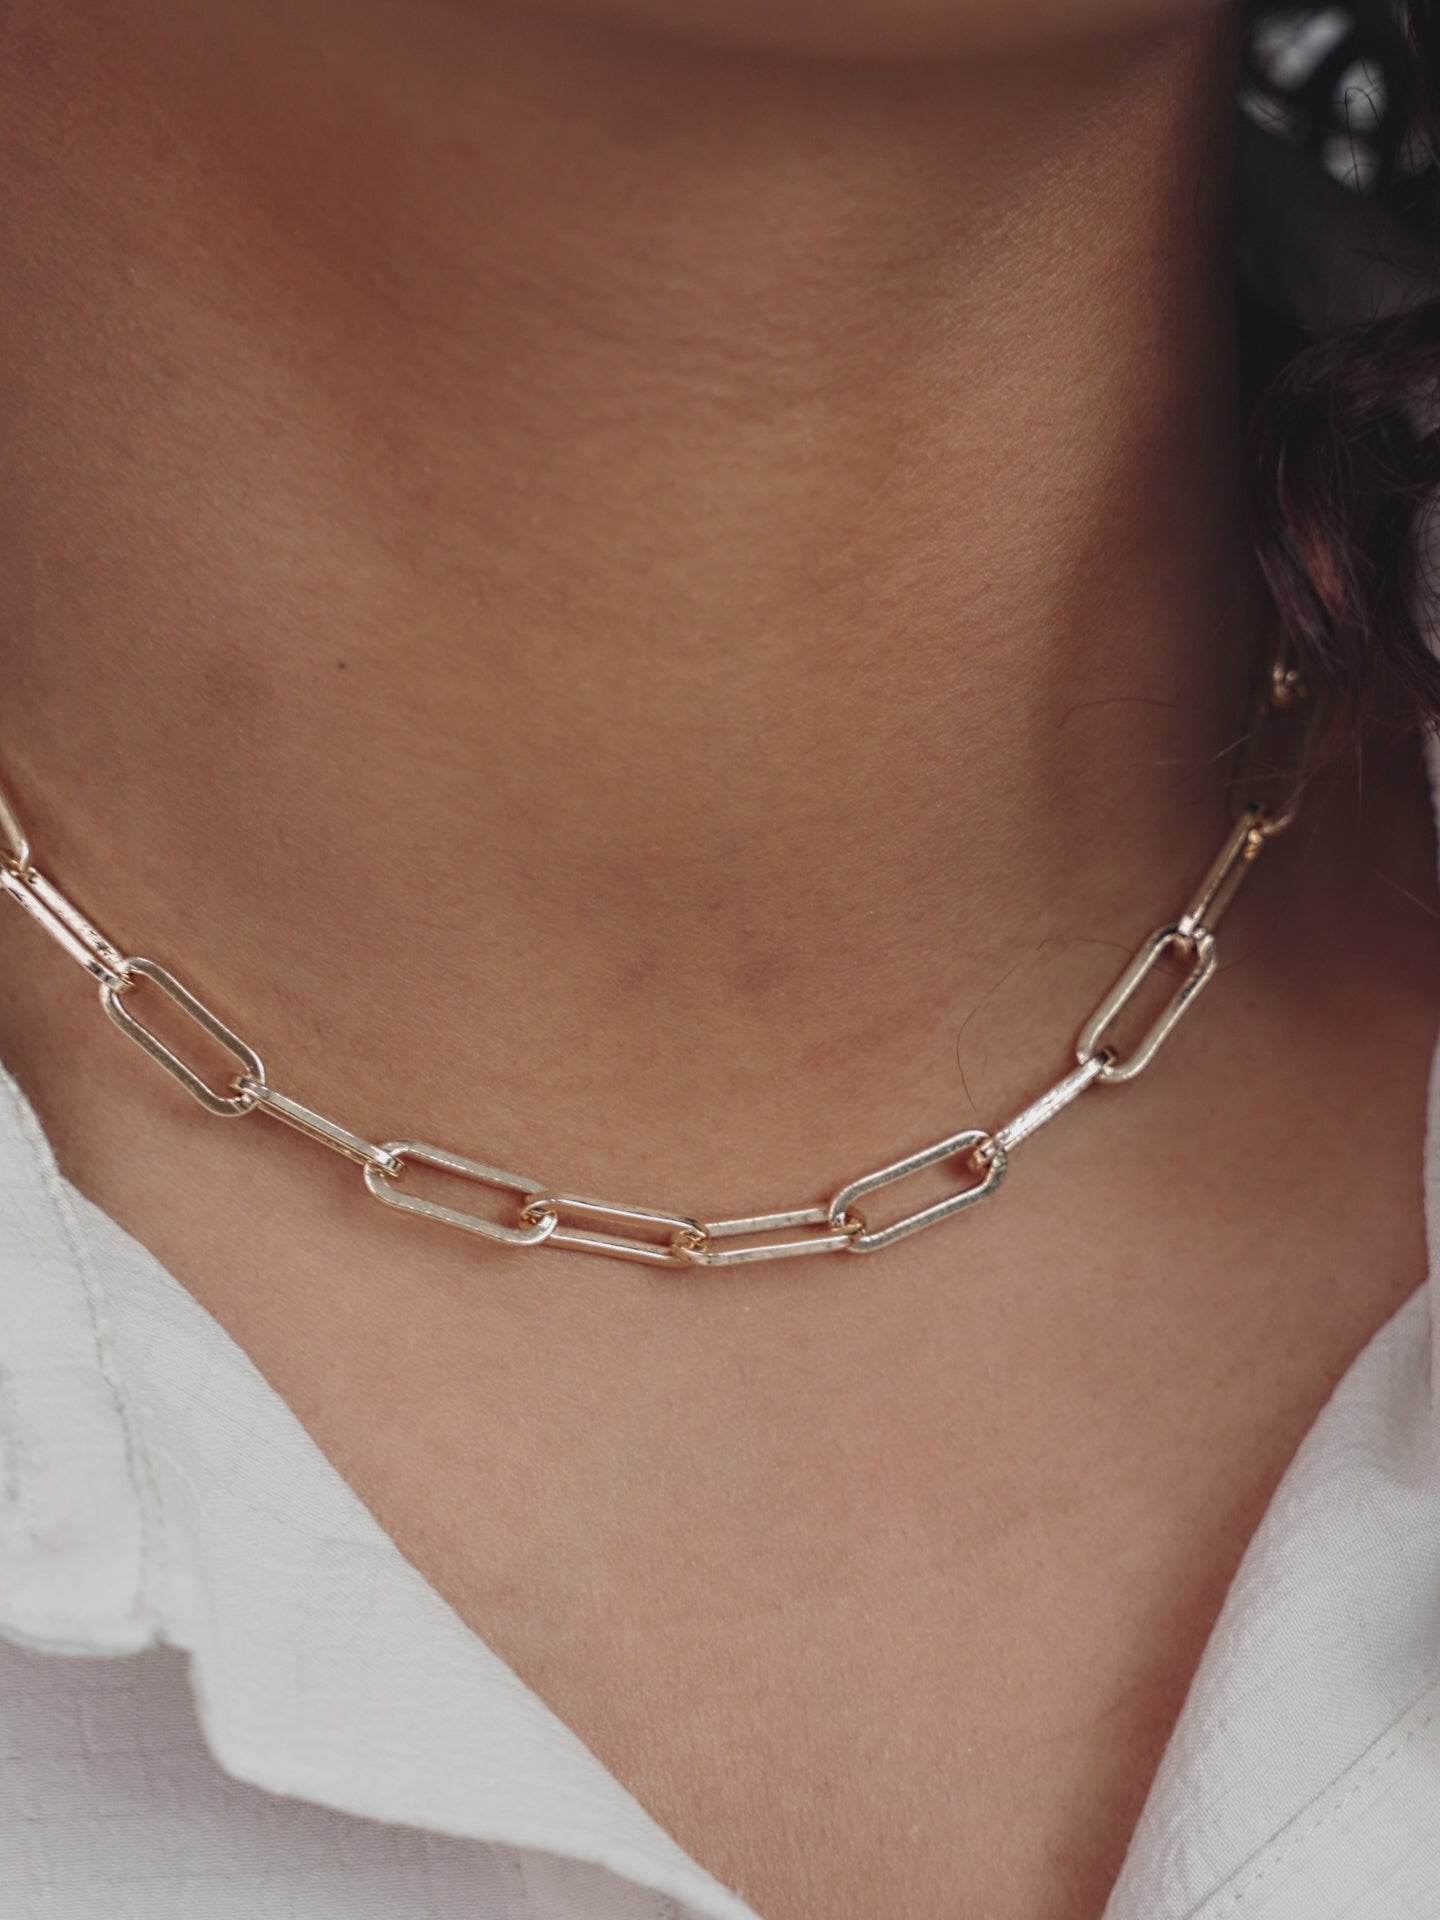 Interlinked Chain Necklace on model in video